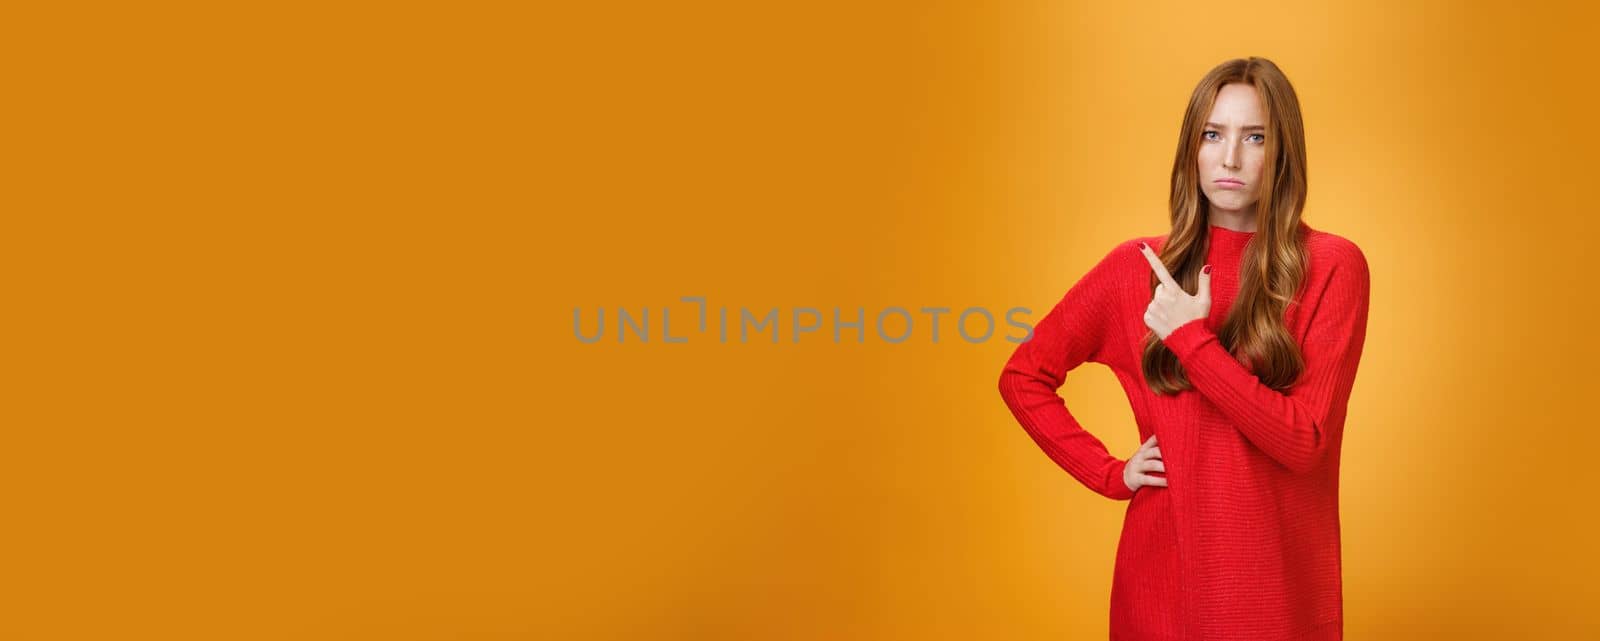 Upset and disappointed young ginger girl in red sweater pointing at upper left corner or behind frowning looking gloomy and angry, standing jealous and moody against orange background.